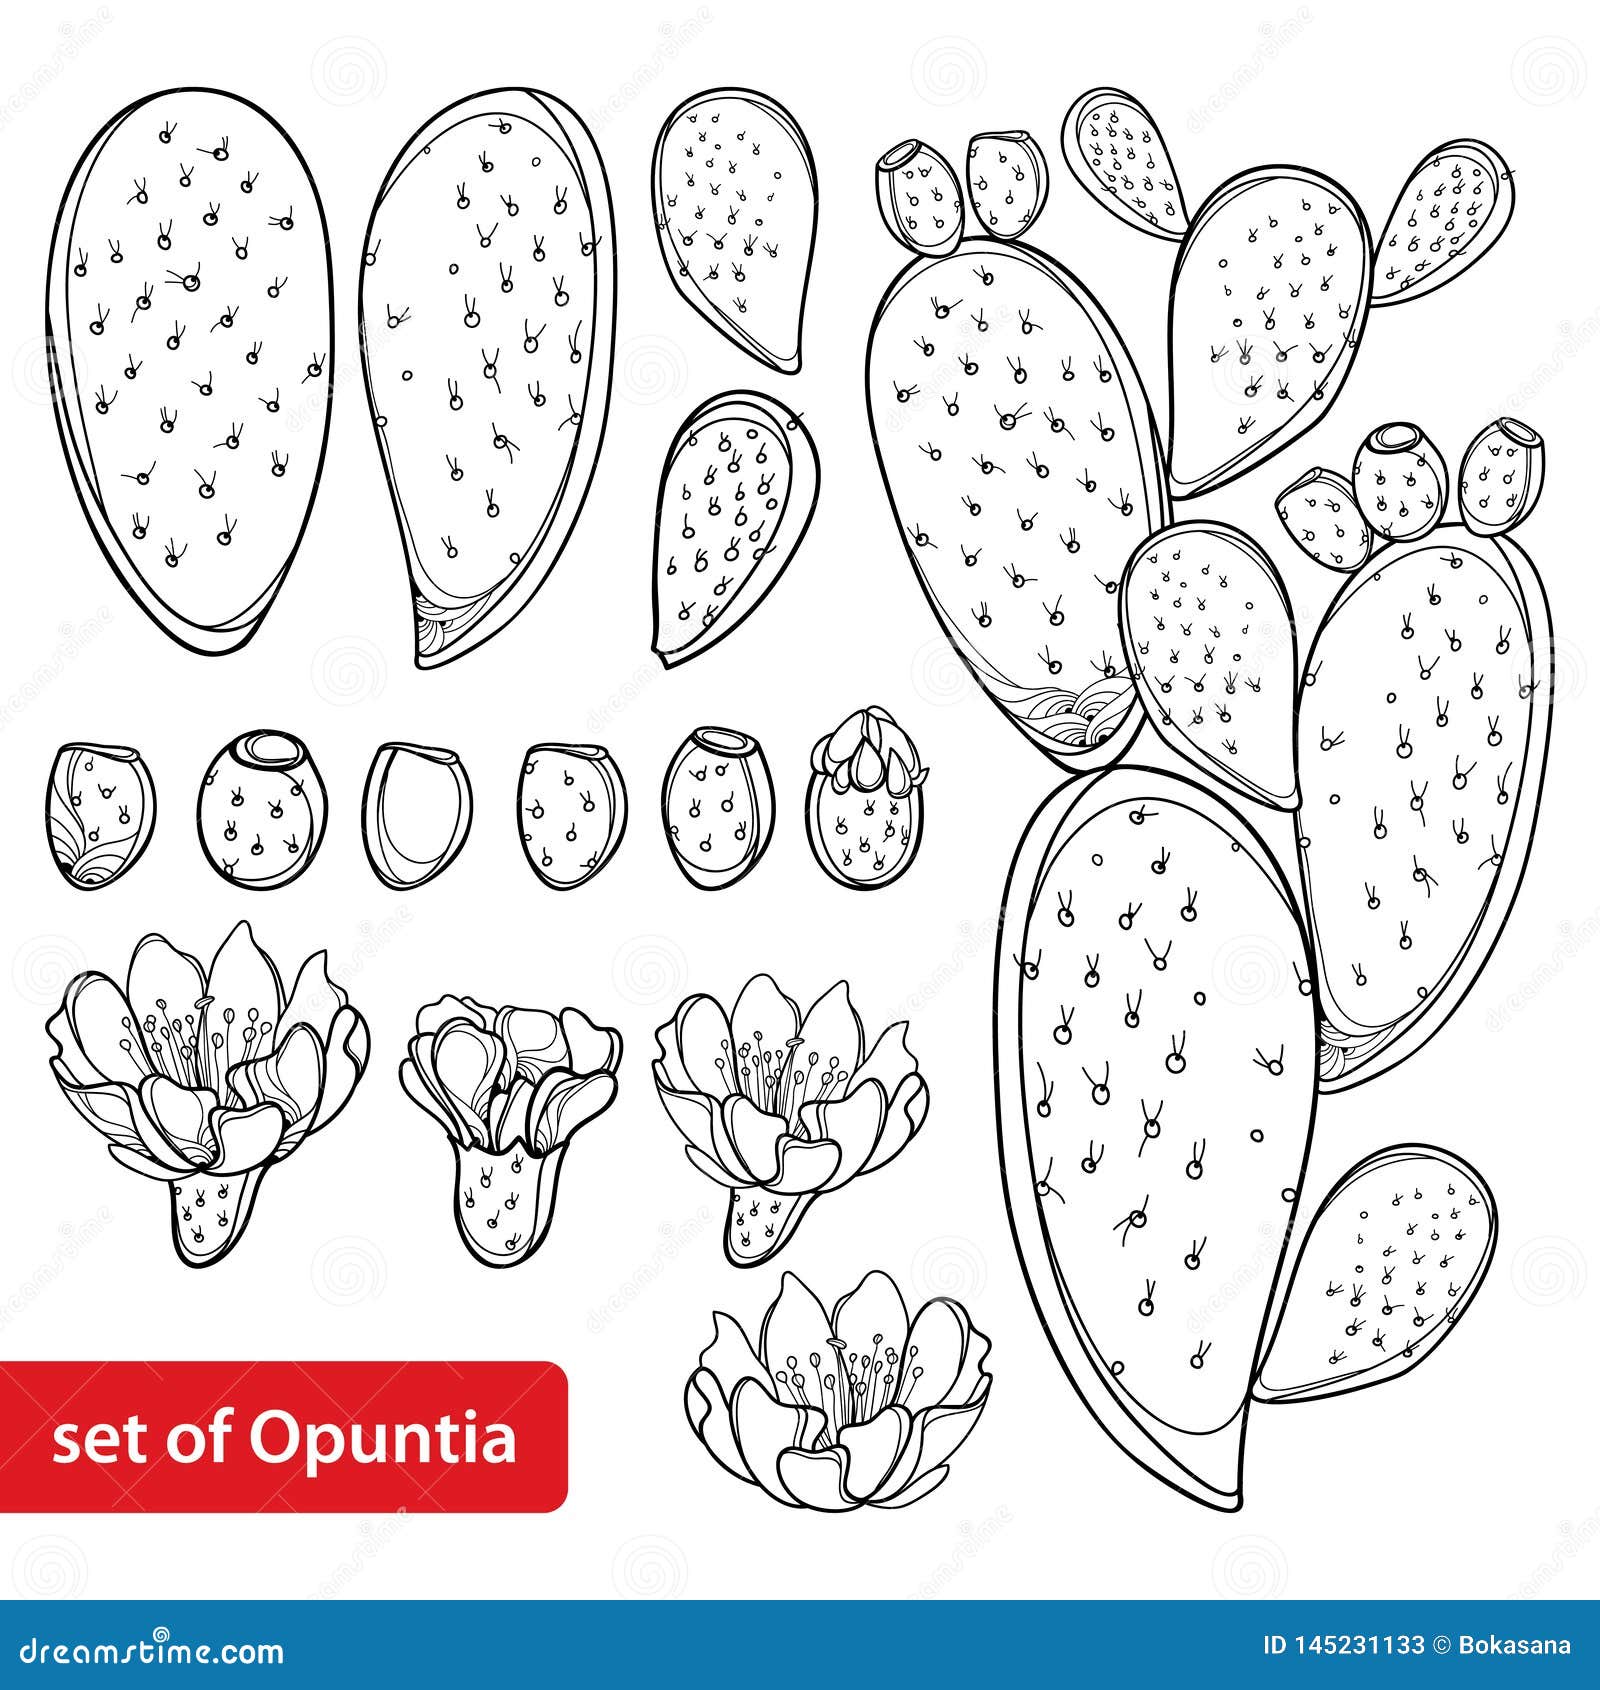  set with outline cactus indian fig opuntia or prickly pear plant, fruit, flower and stem in black  on white.